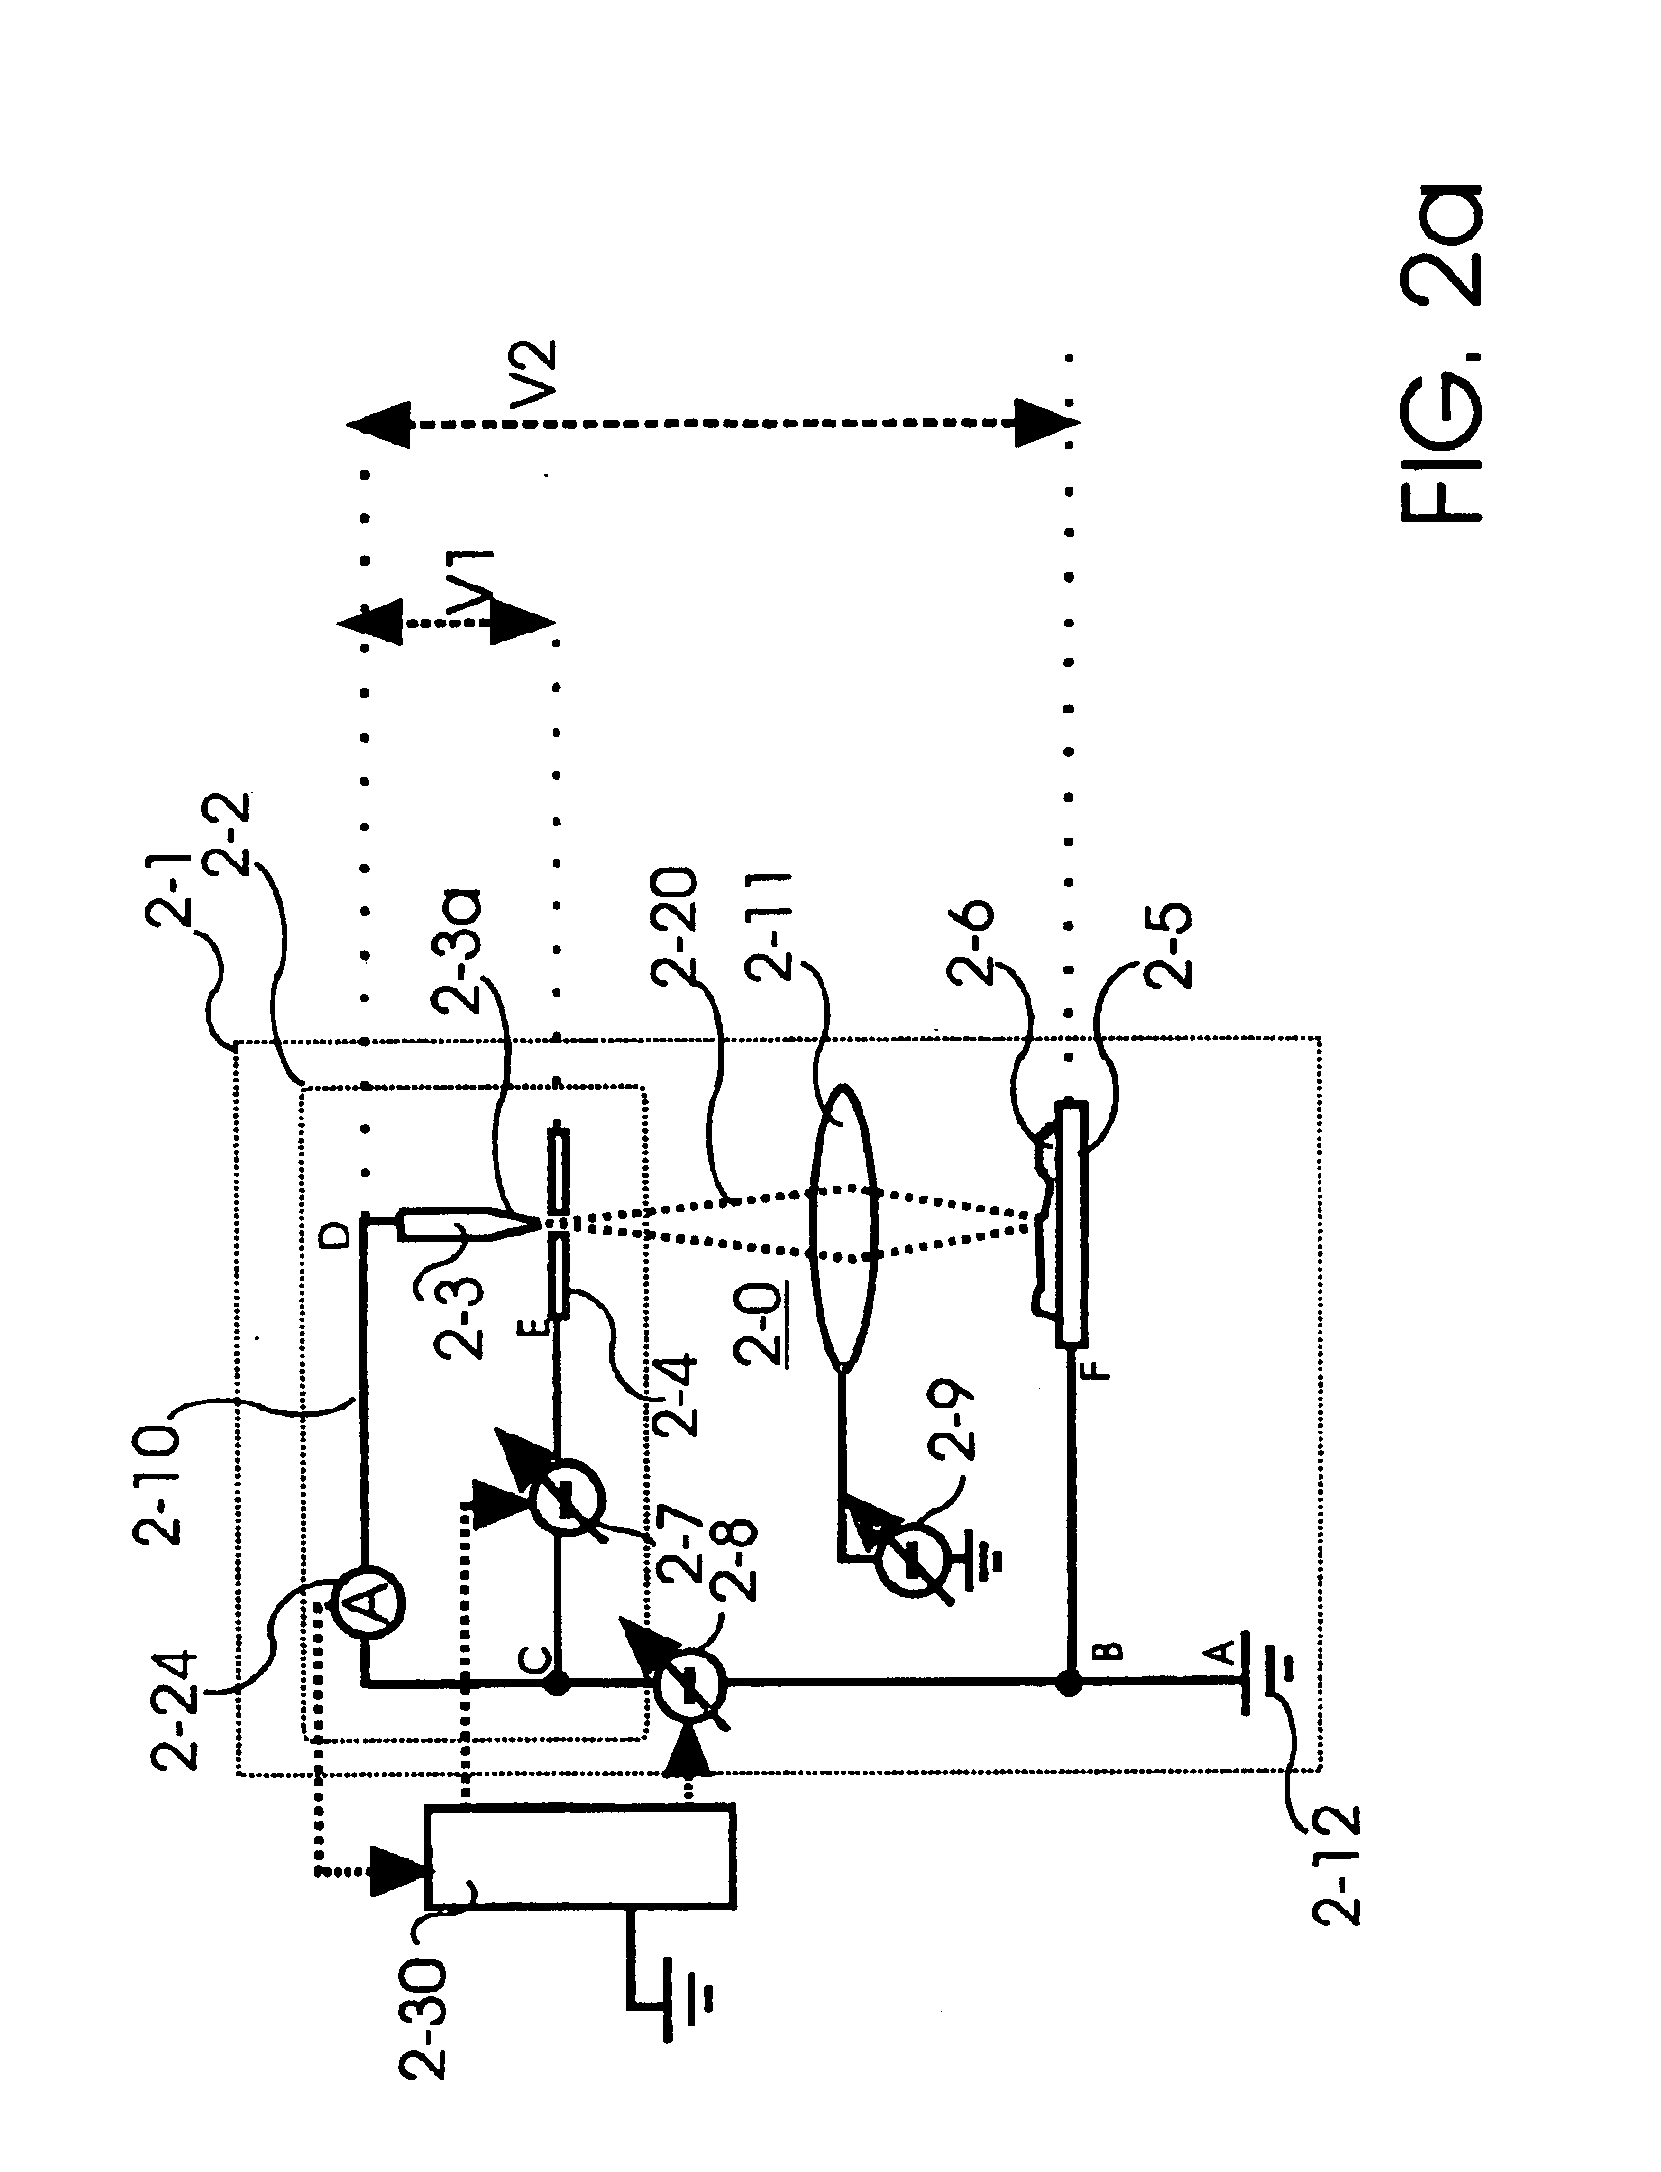 Device and method for controlling focussed electron beams